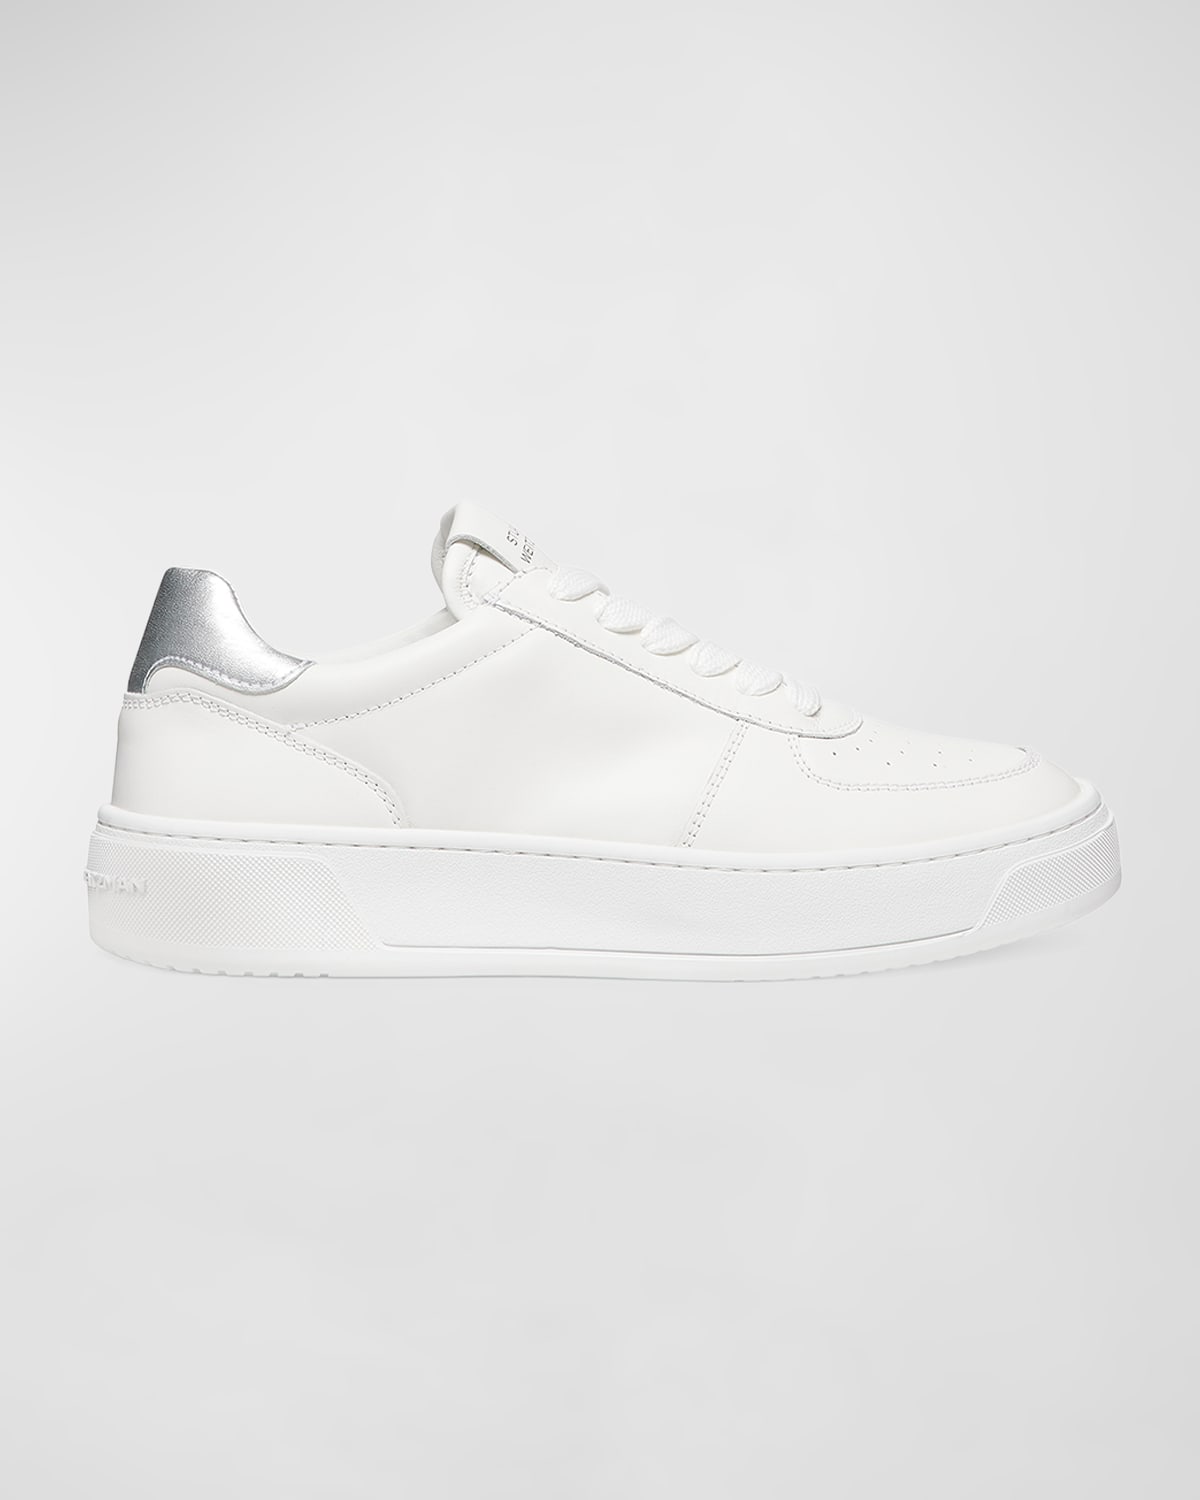 Stuart Weitzman Women's Sw Courtside Lace Up Low Top Trainers In White Silver